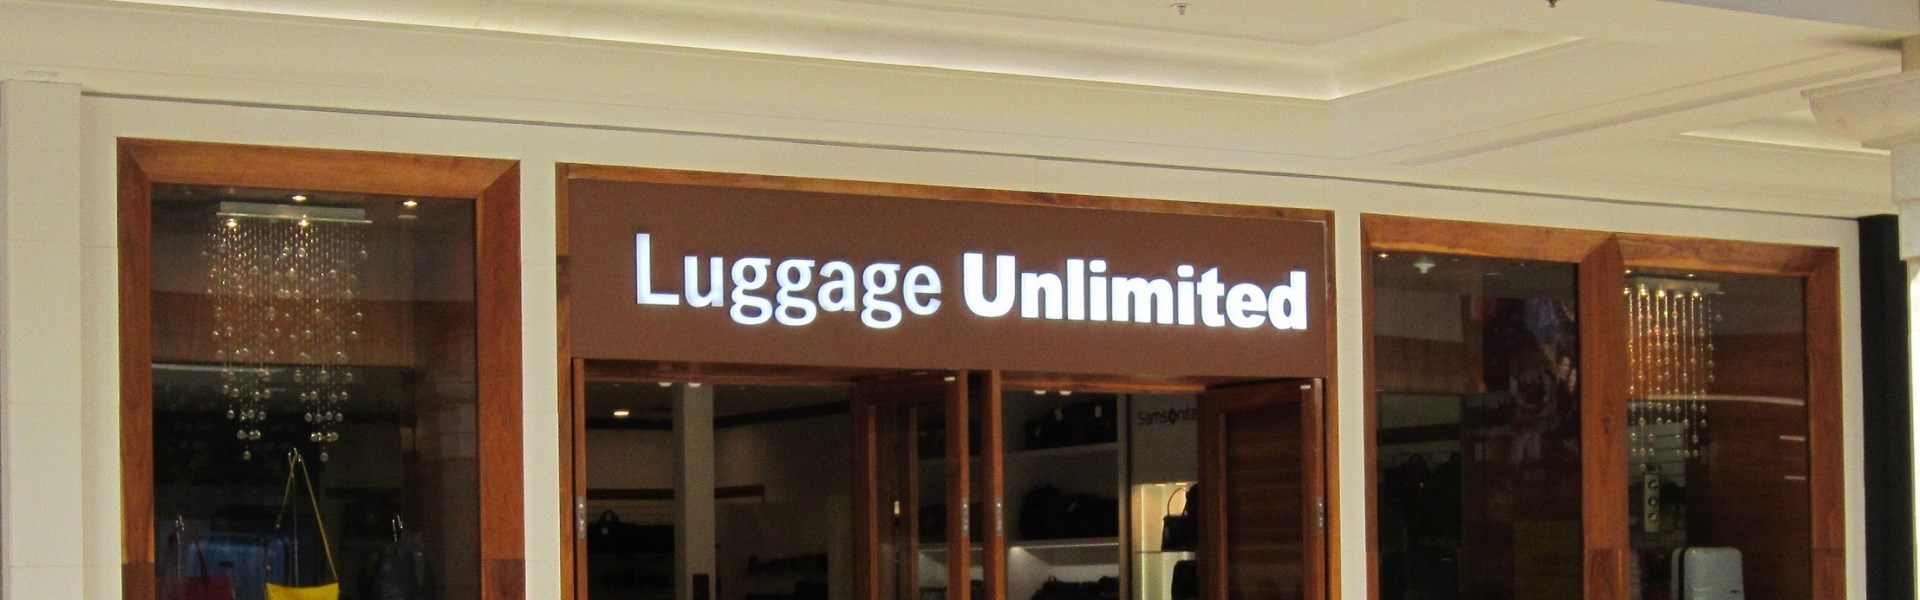 Luggage Unlimited